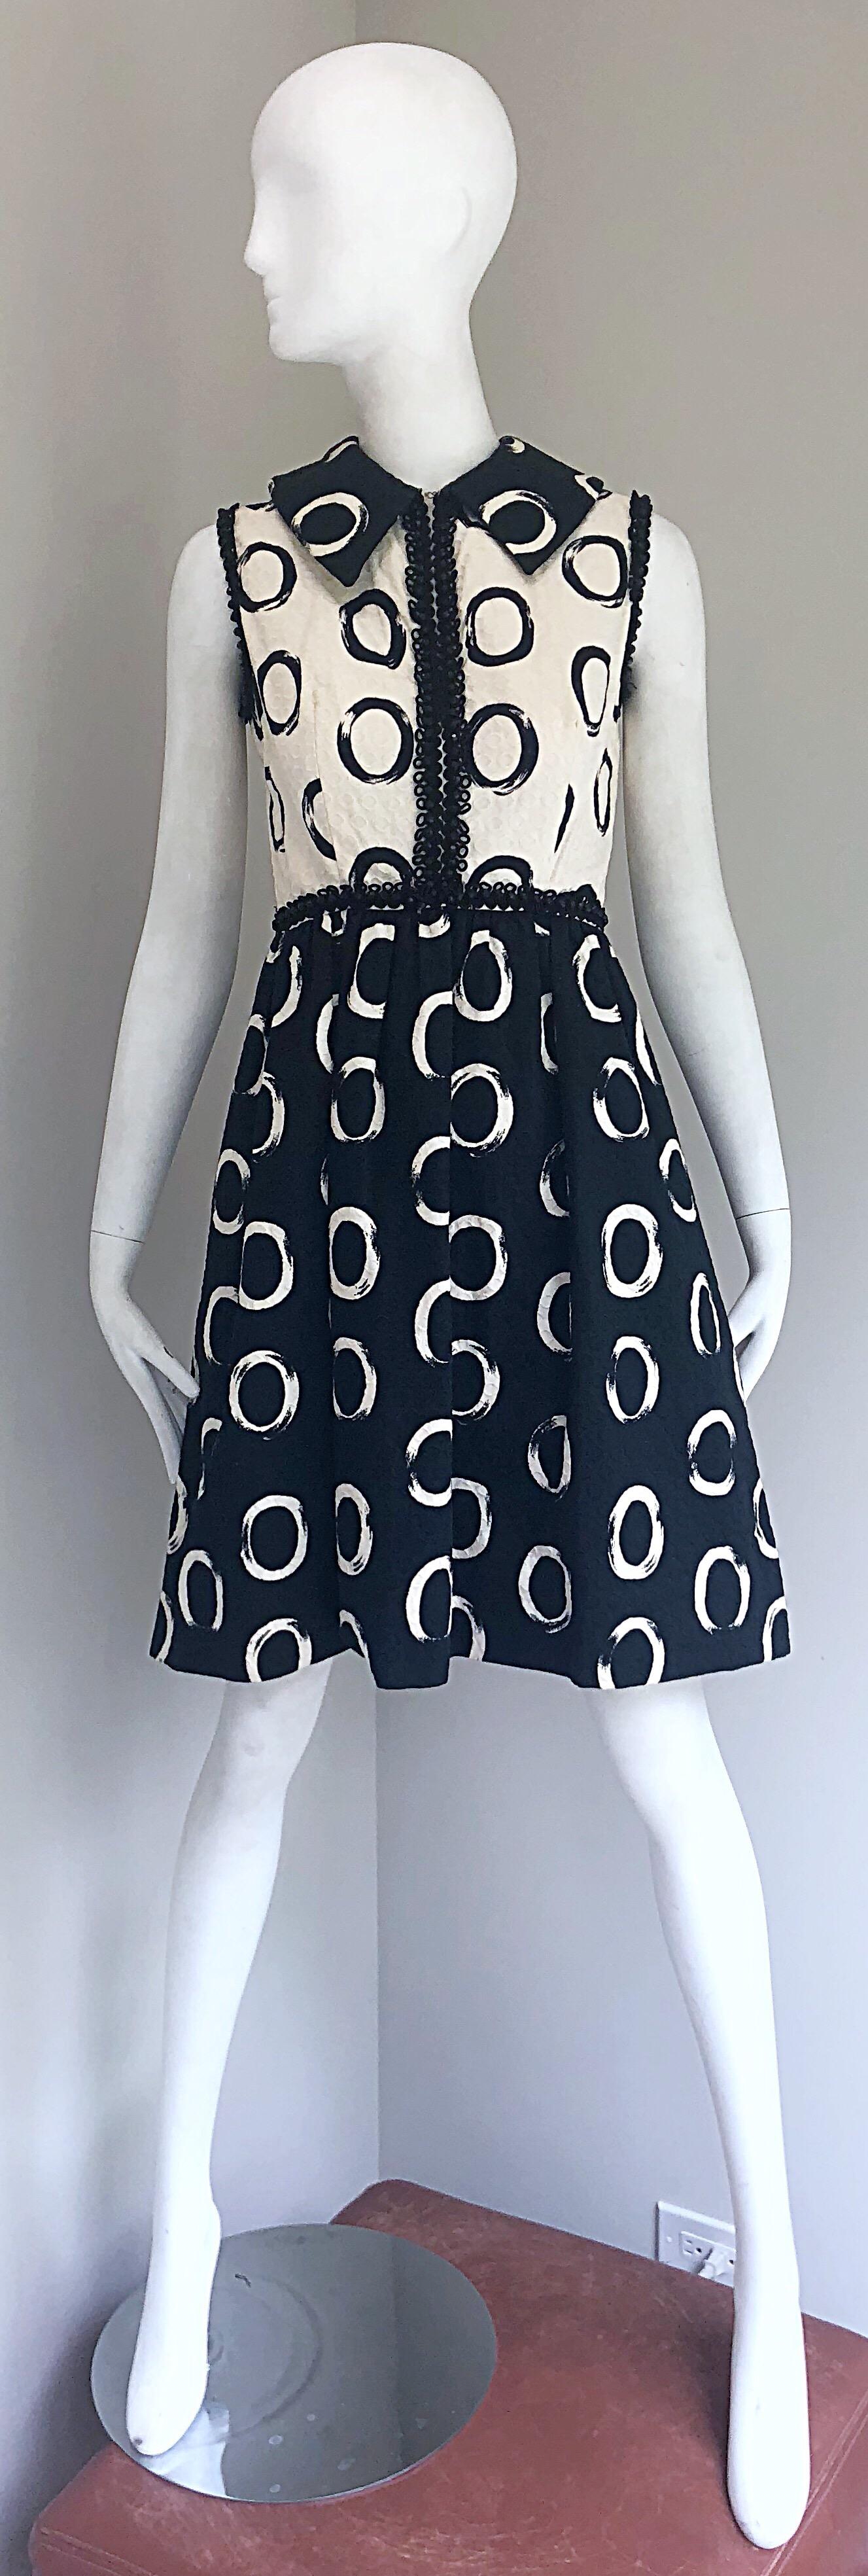 Chic vintage 1960s OSCAR DE LA RENTA black and white (light ivory) beaded sleeveless A-Line cotton pique dress! Features the rare early signature 'O' print throughout. Black embroidery at each sleeve, down the front bodice, and waistband with black